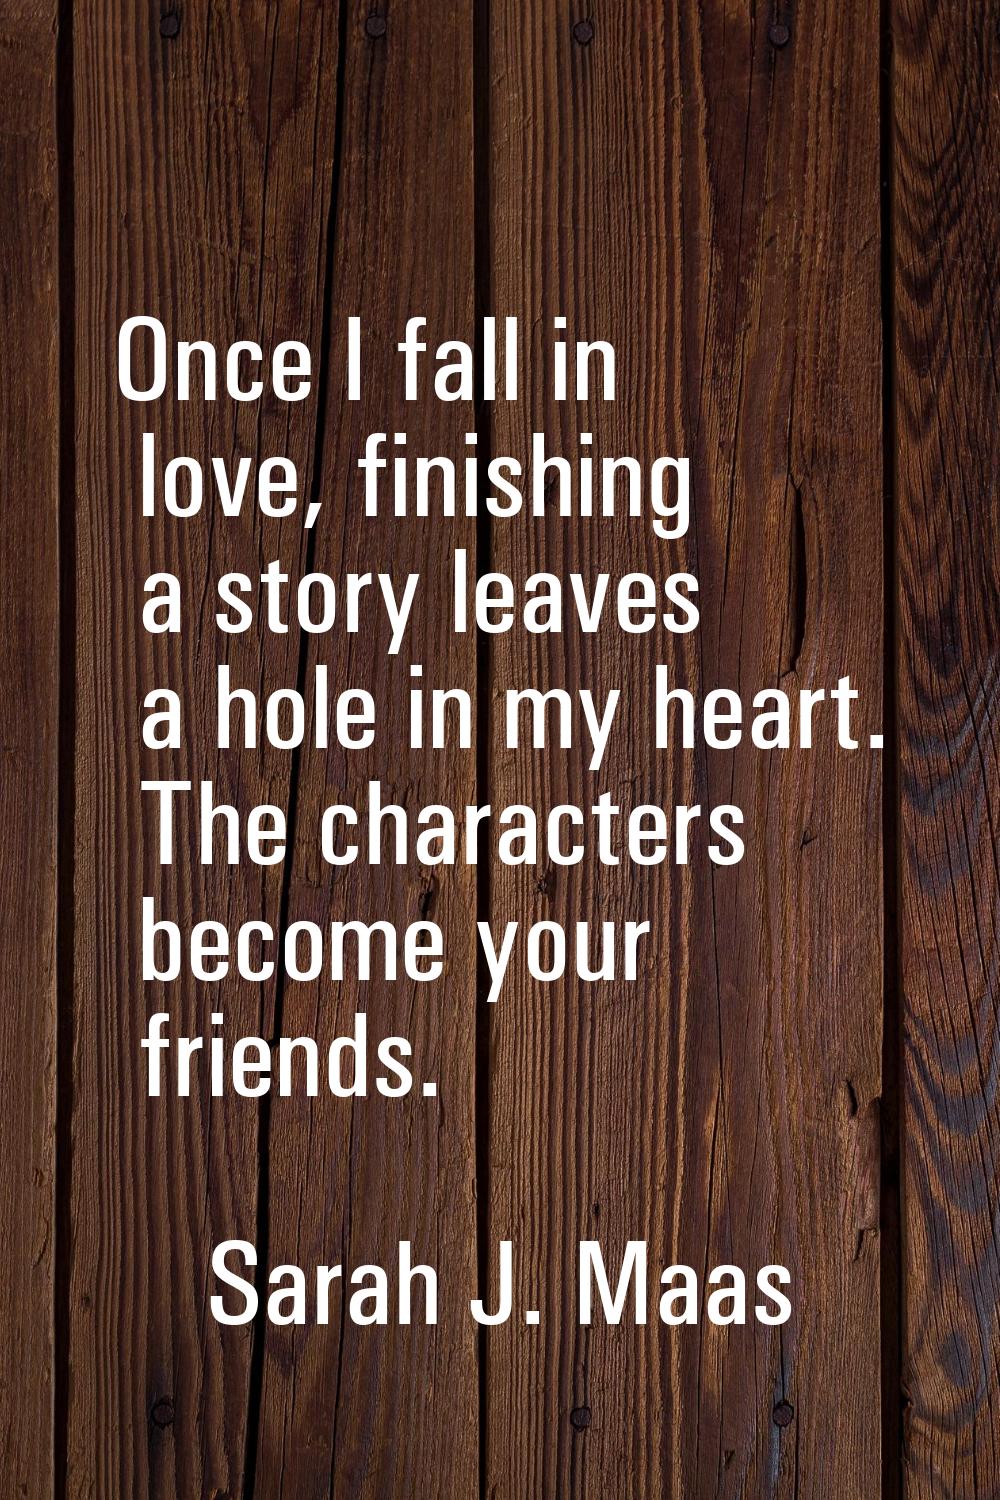 Once I fall in love, finishing a story leaves a hole in my heart. The characters become your friend